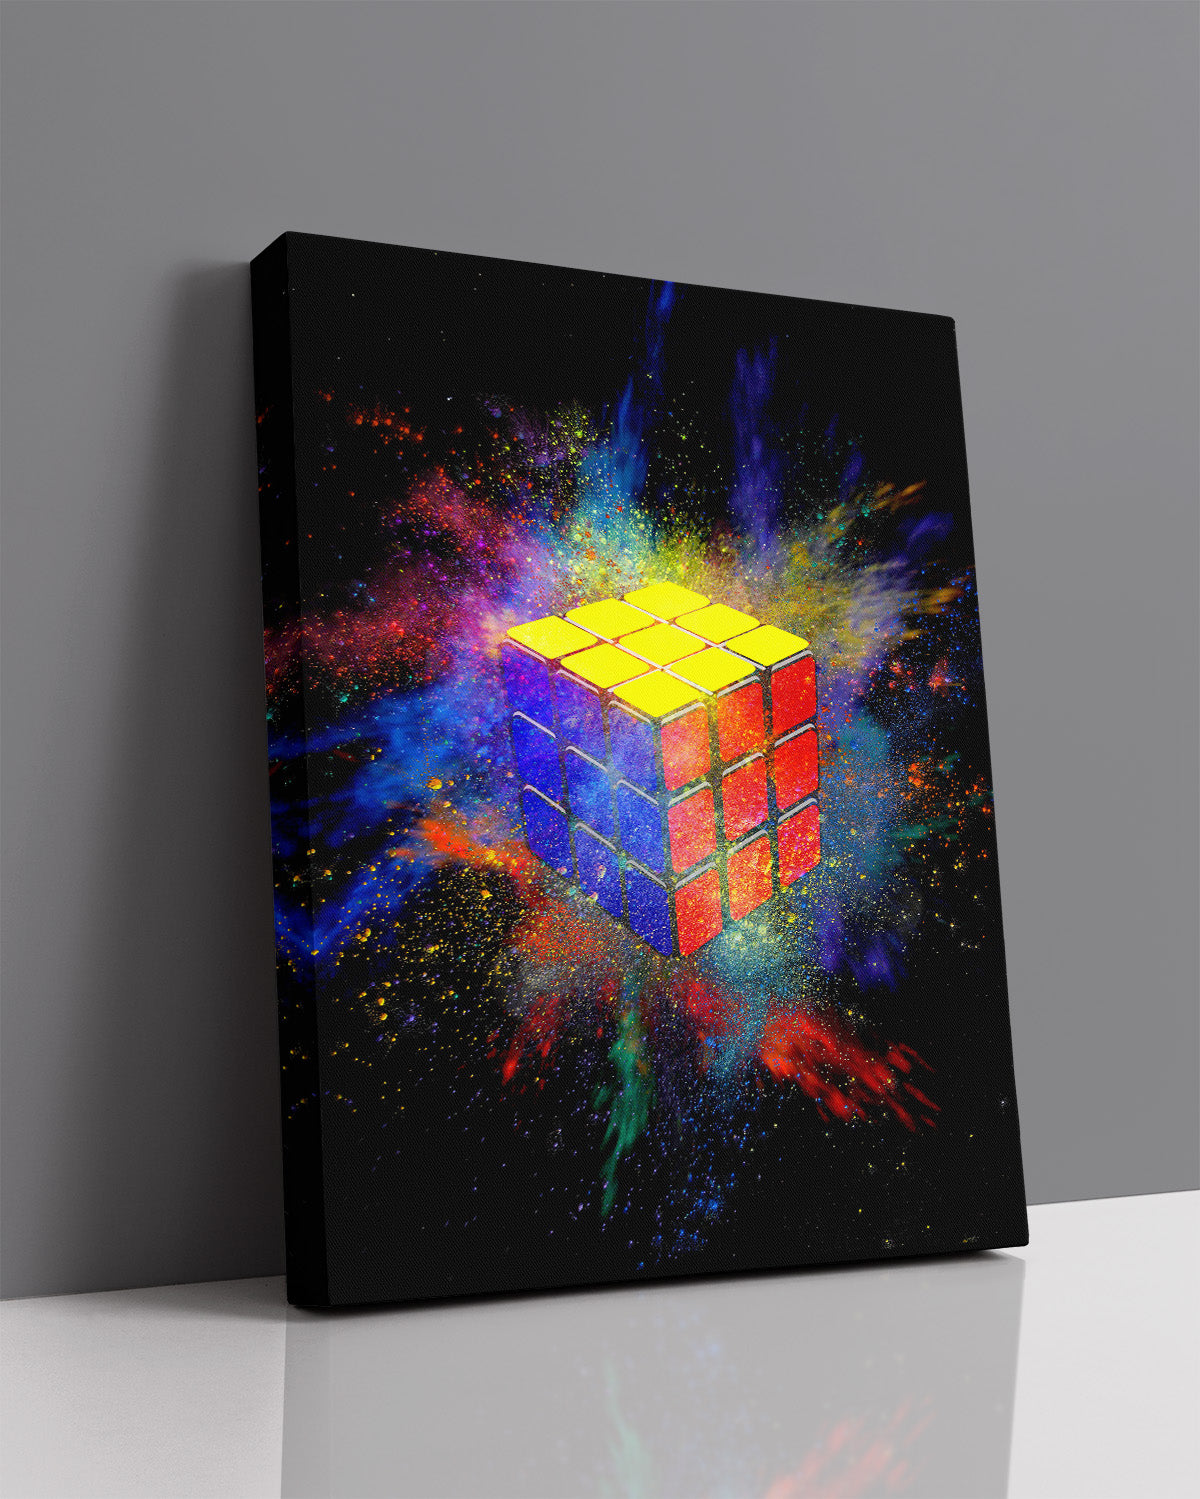 Govivo Rubik's Cube Color Burst - Wall Art Decor Print with a black background - Unframed artwork printed on your choice of photographic paper, poster or canvas